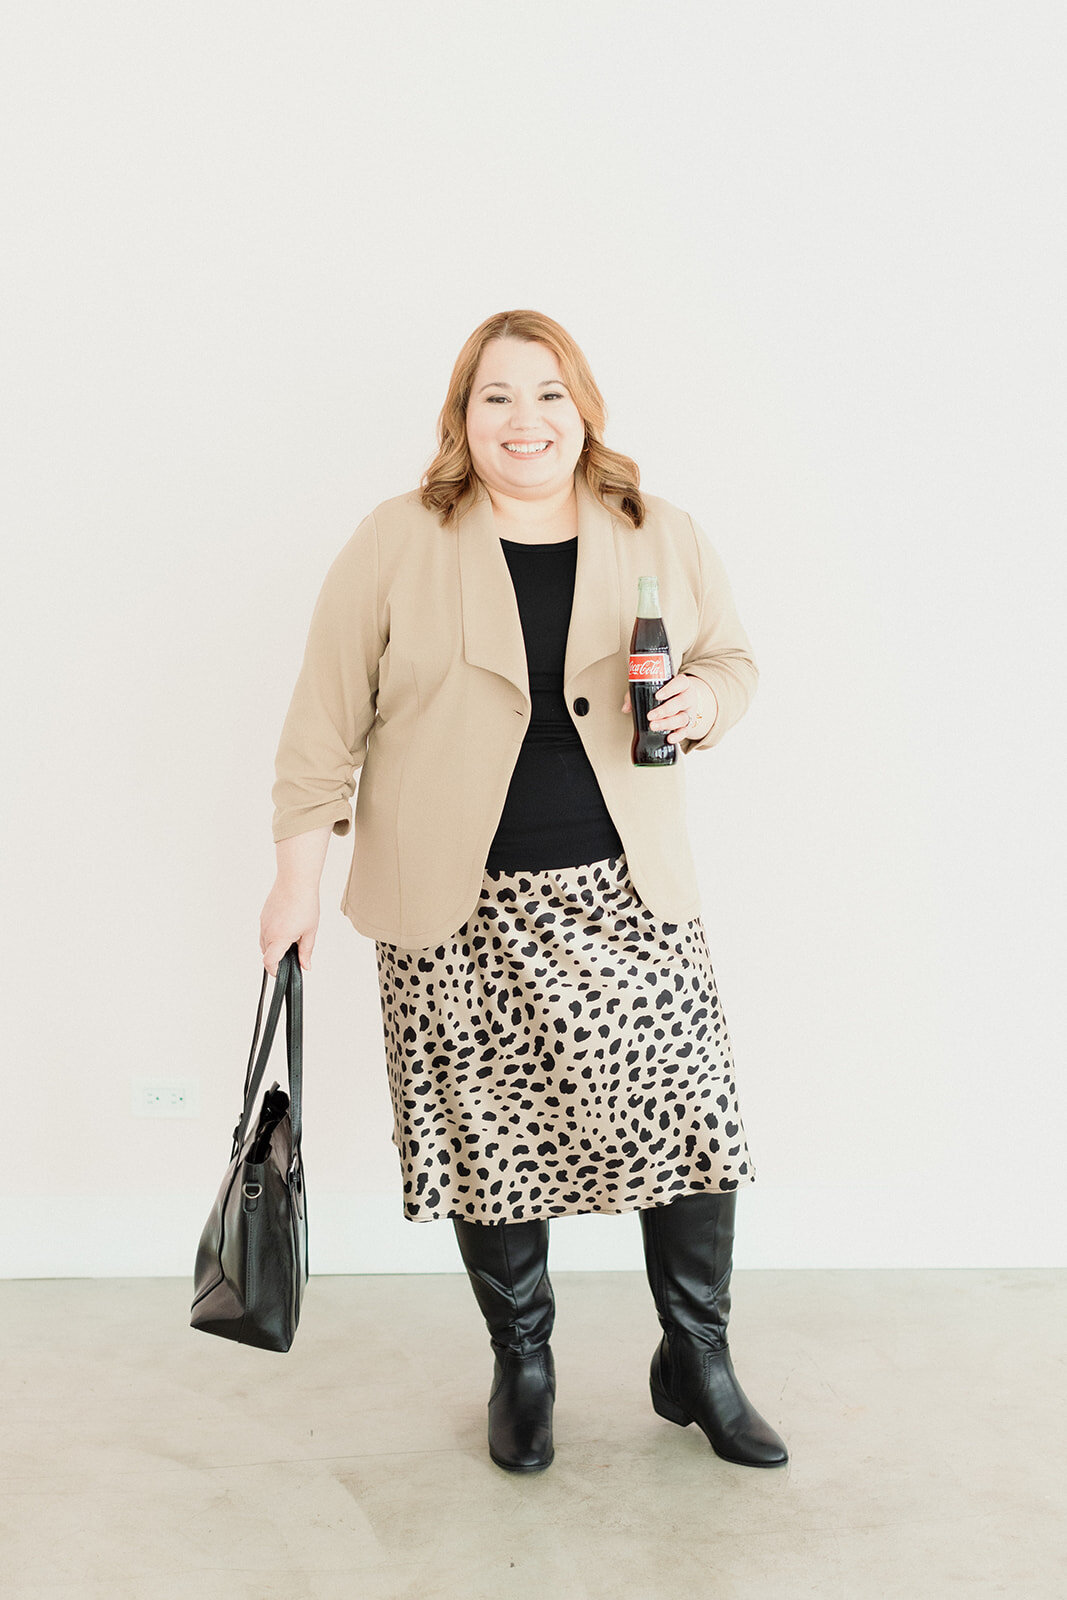 professional woman smiling and holding her bag and a cola drink